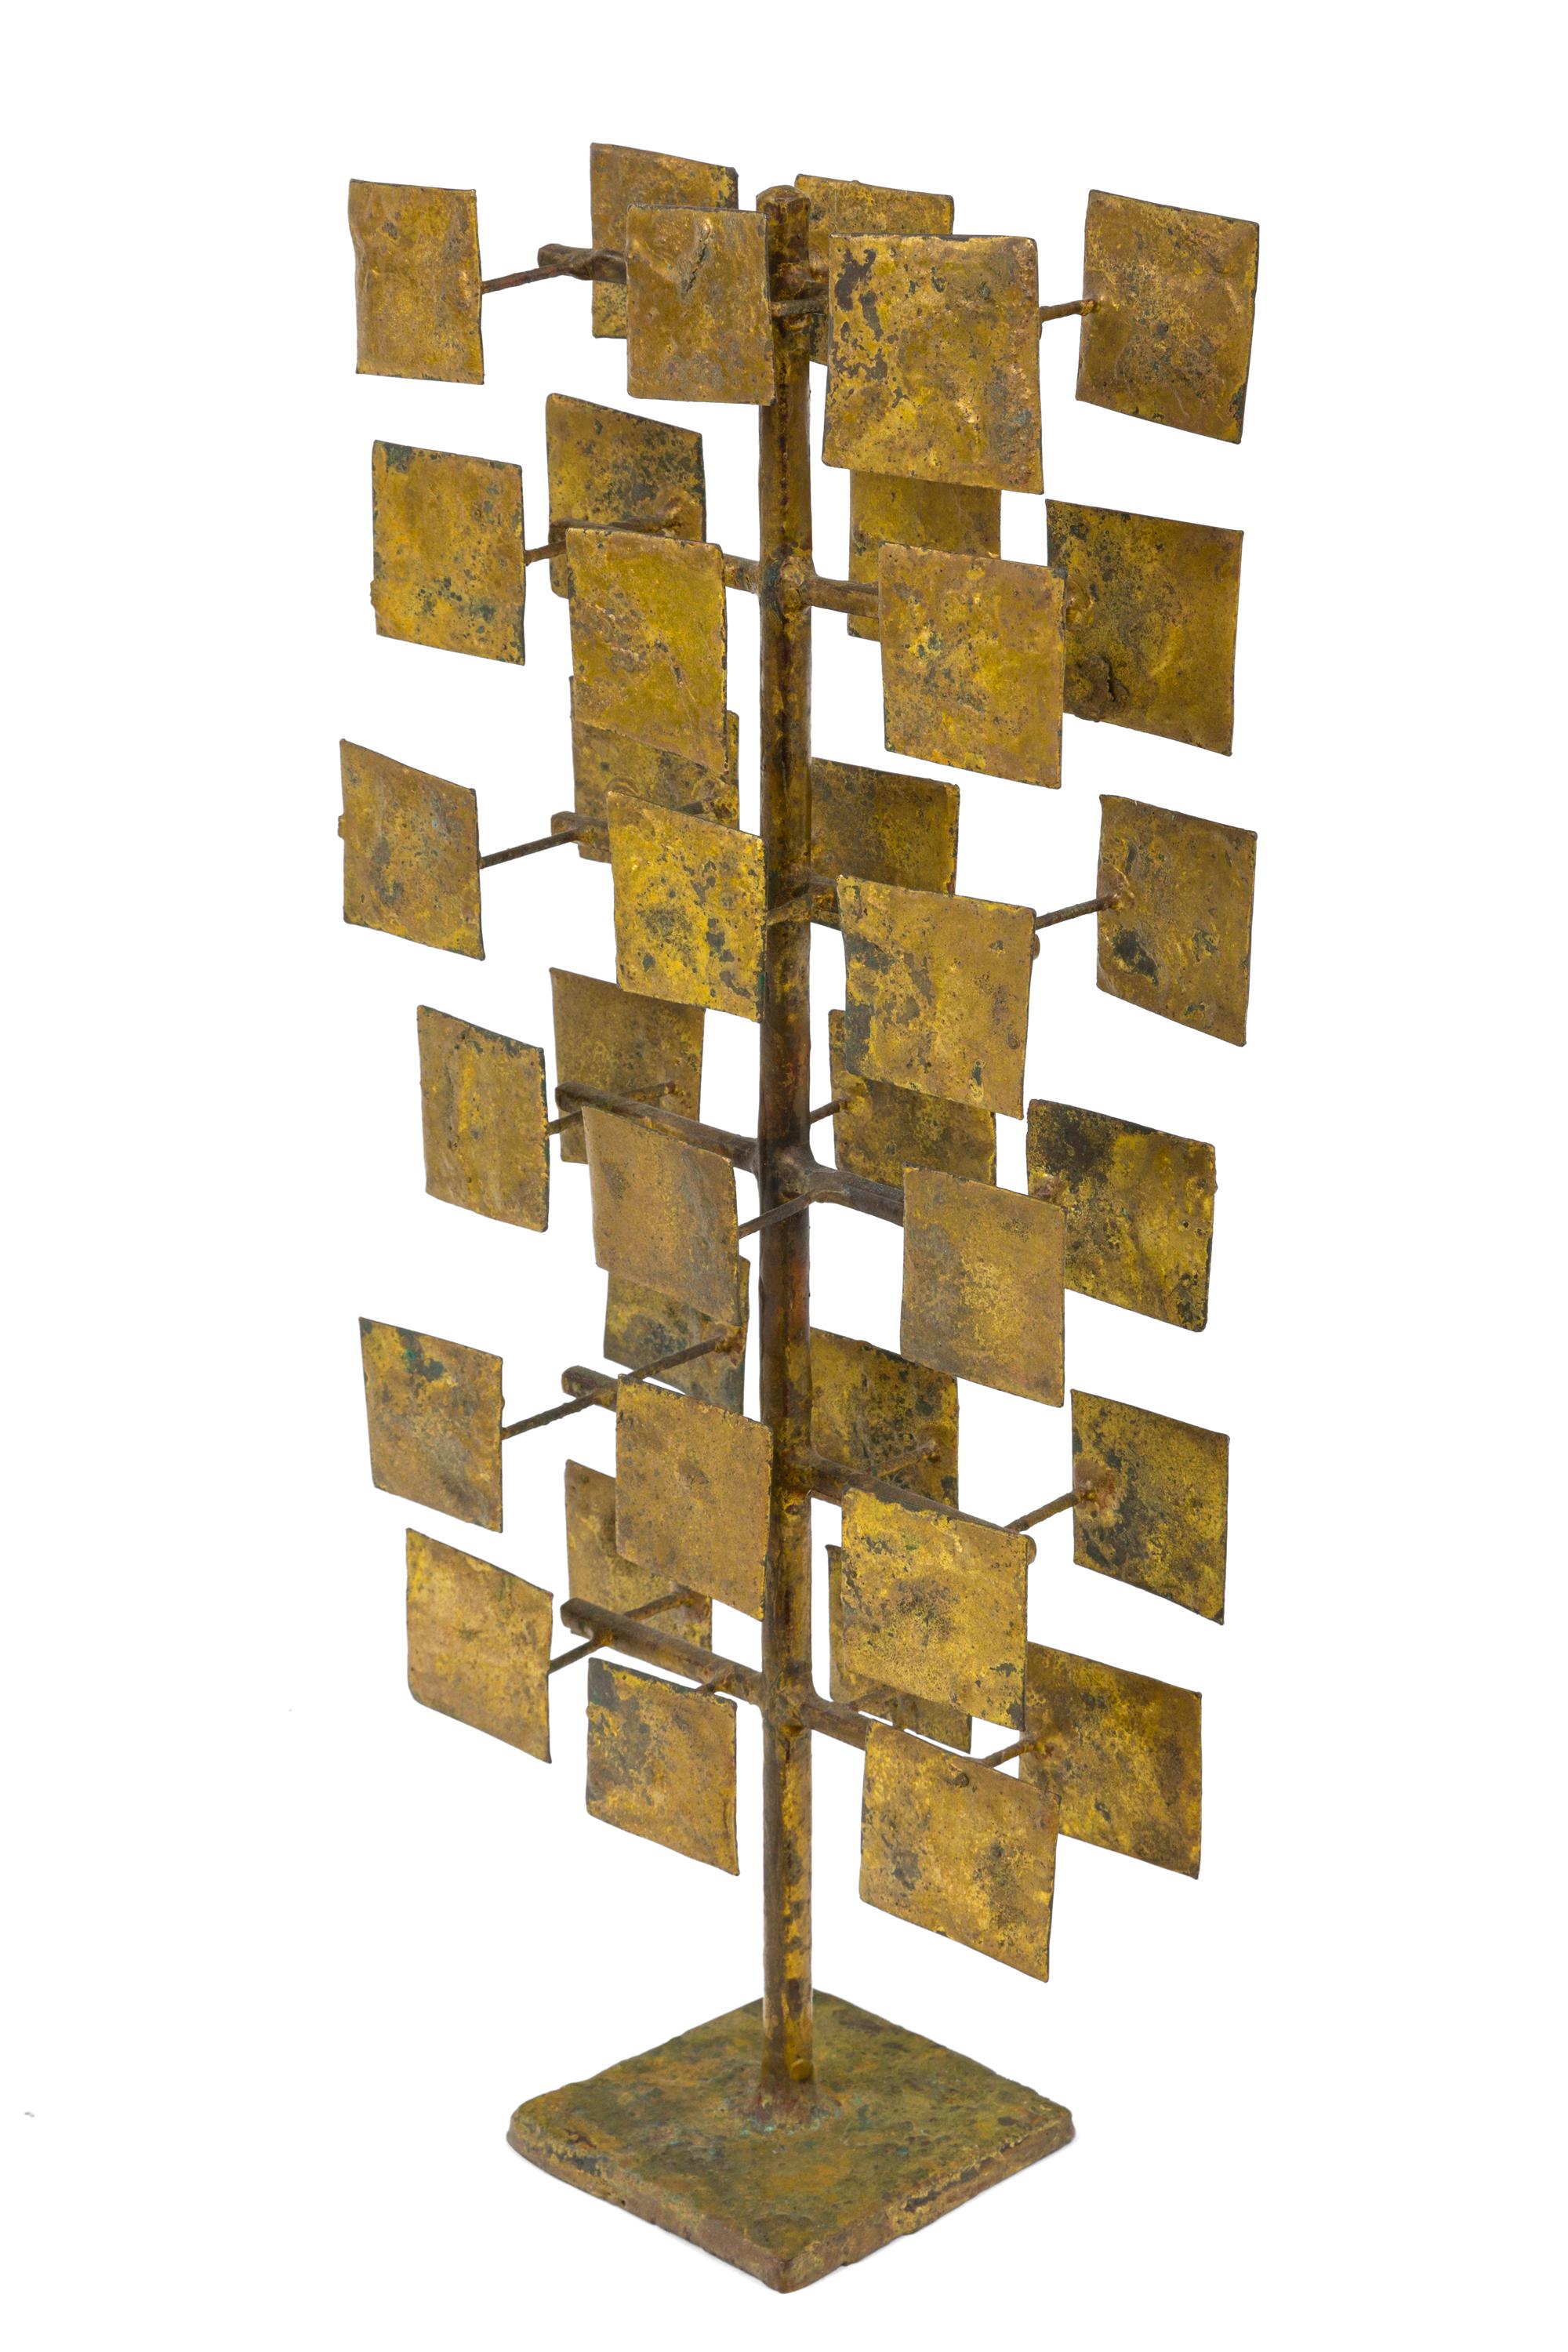 This is the maquette for a set of ten sculpture screens commissioned by architect and interior designer Florence Knoll for the First National Bank of Miami. The screens were amongst the earliest of approximately fifty commissions Bertoia executed